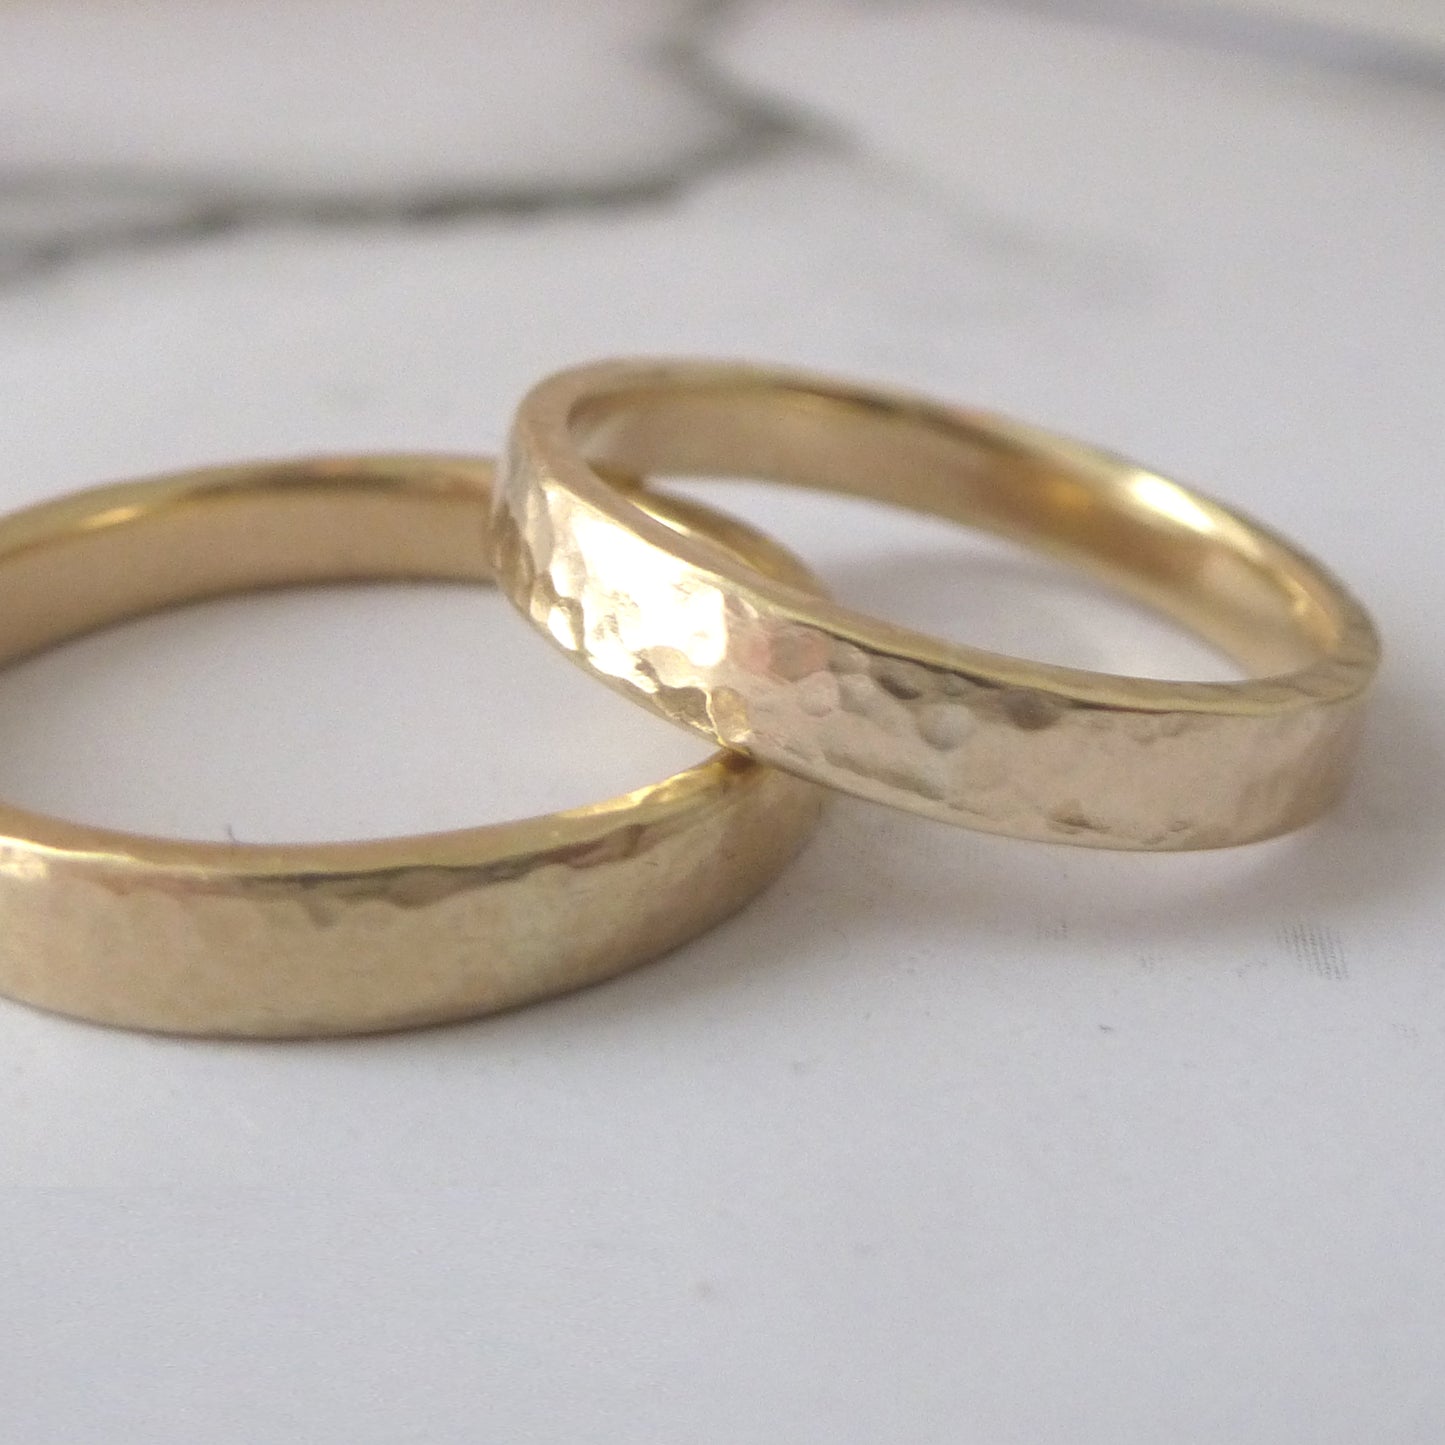 3mm hammered wedding ring in 9ct yellow gold, recycled yellow gold, square edges